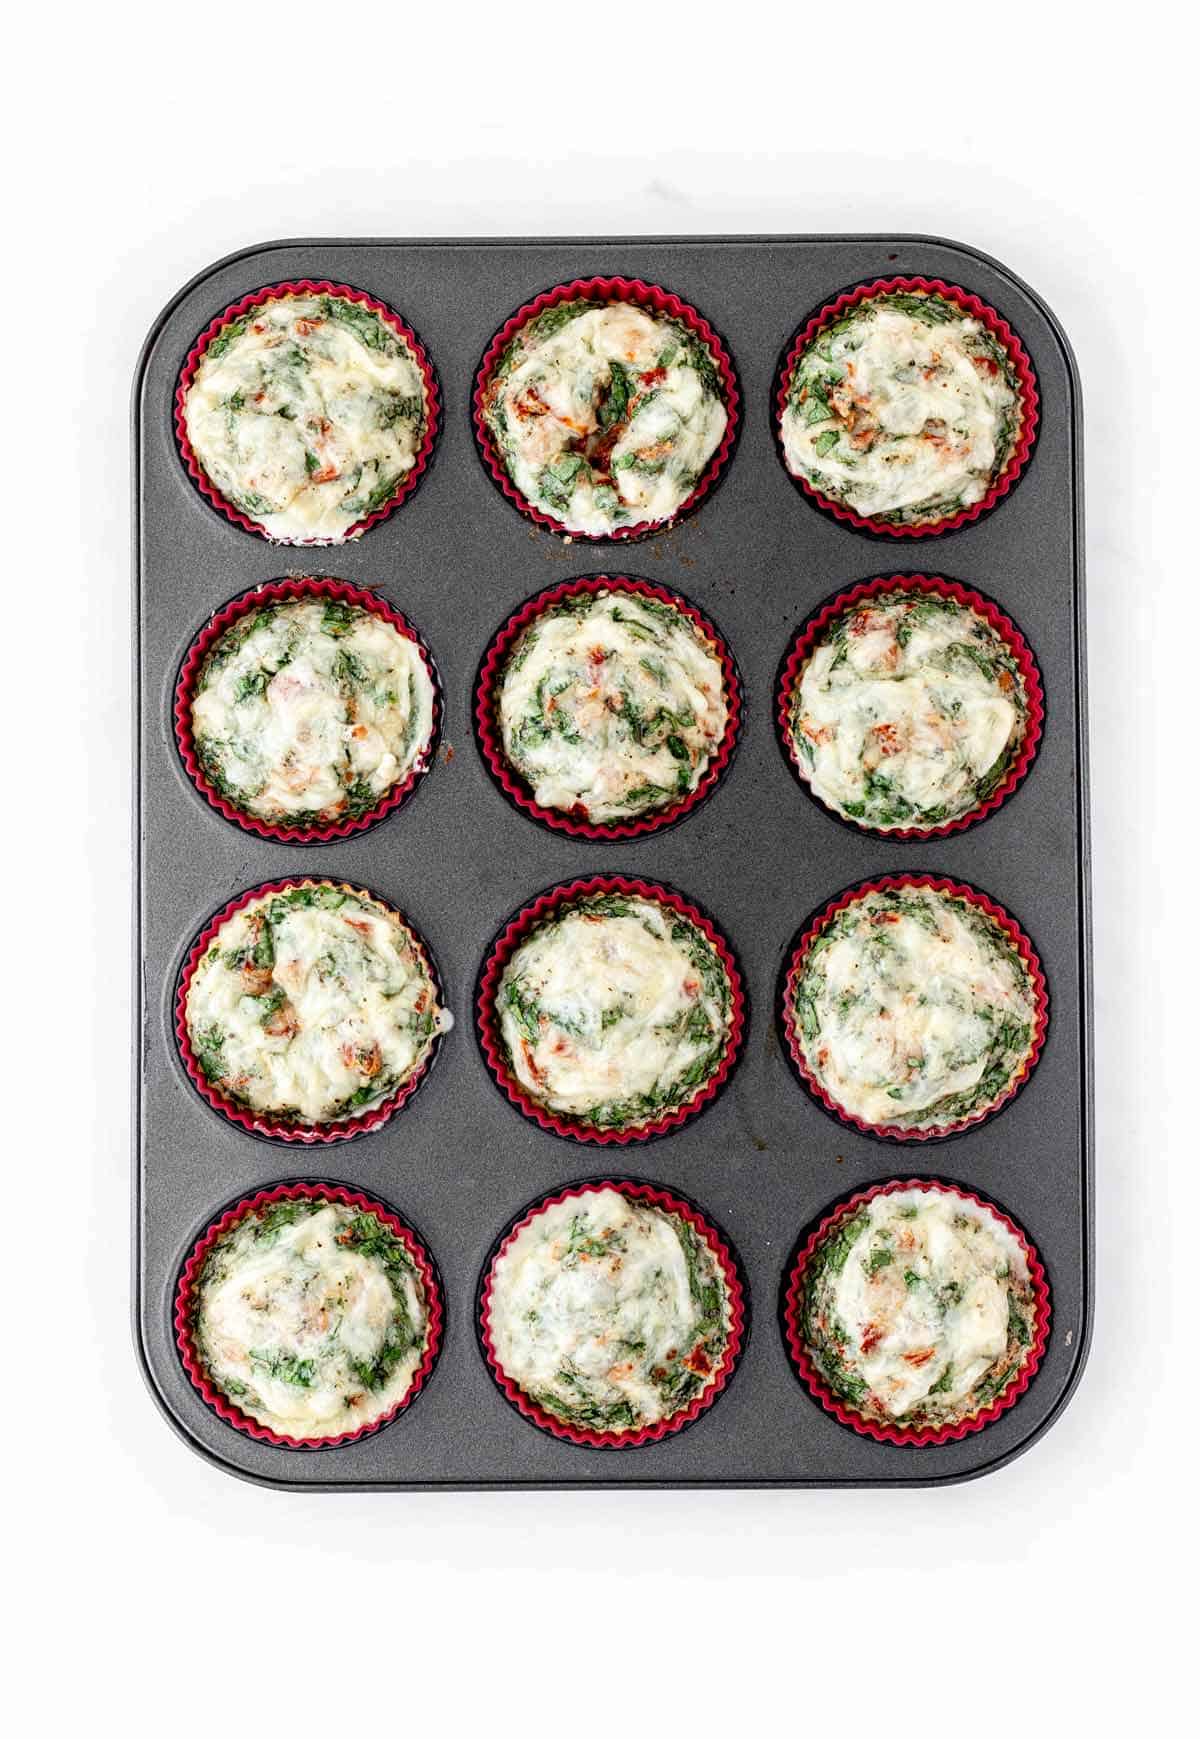 Baked egg white bites in a muffin tin.